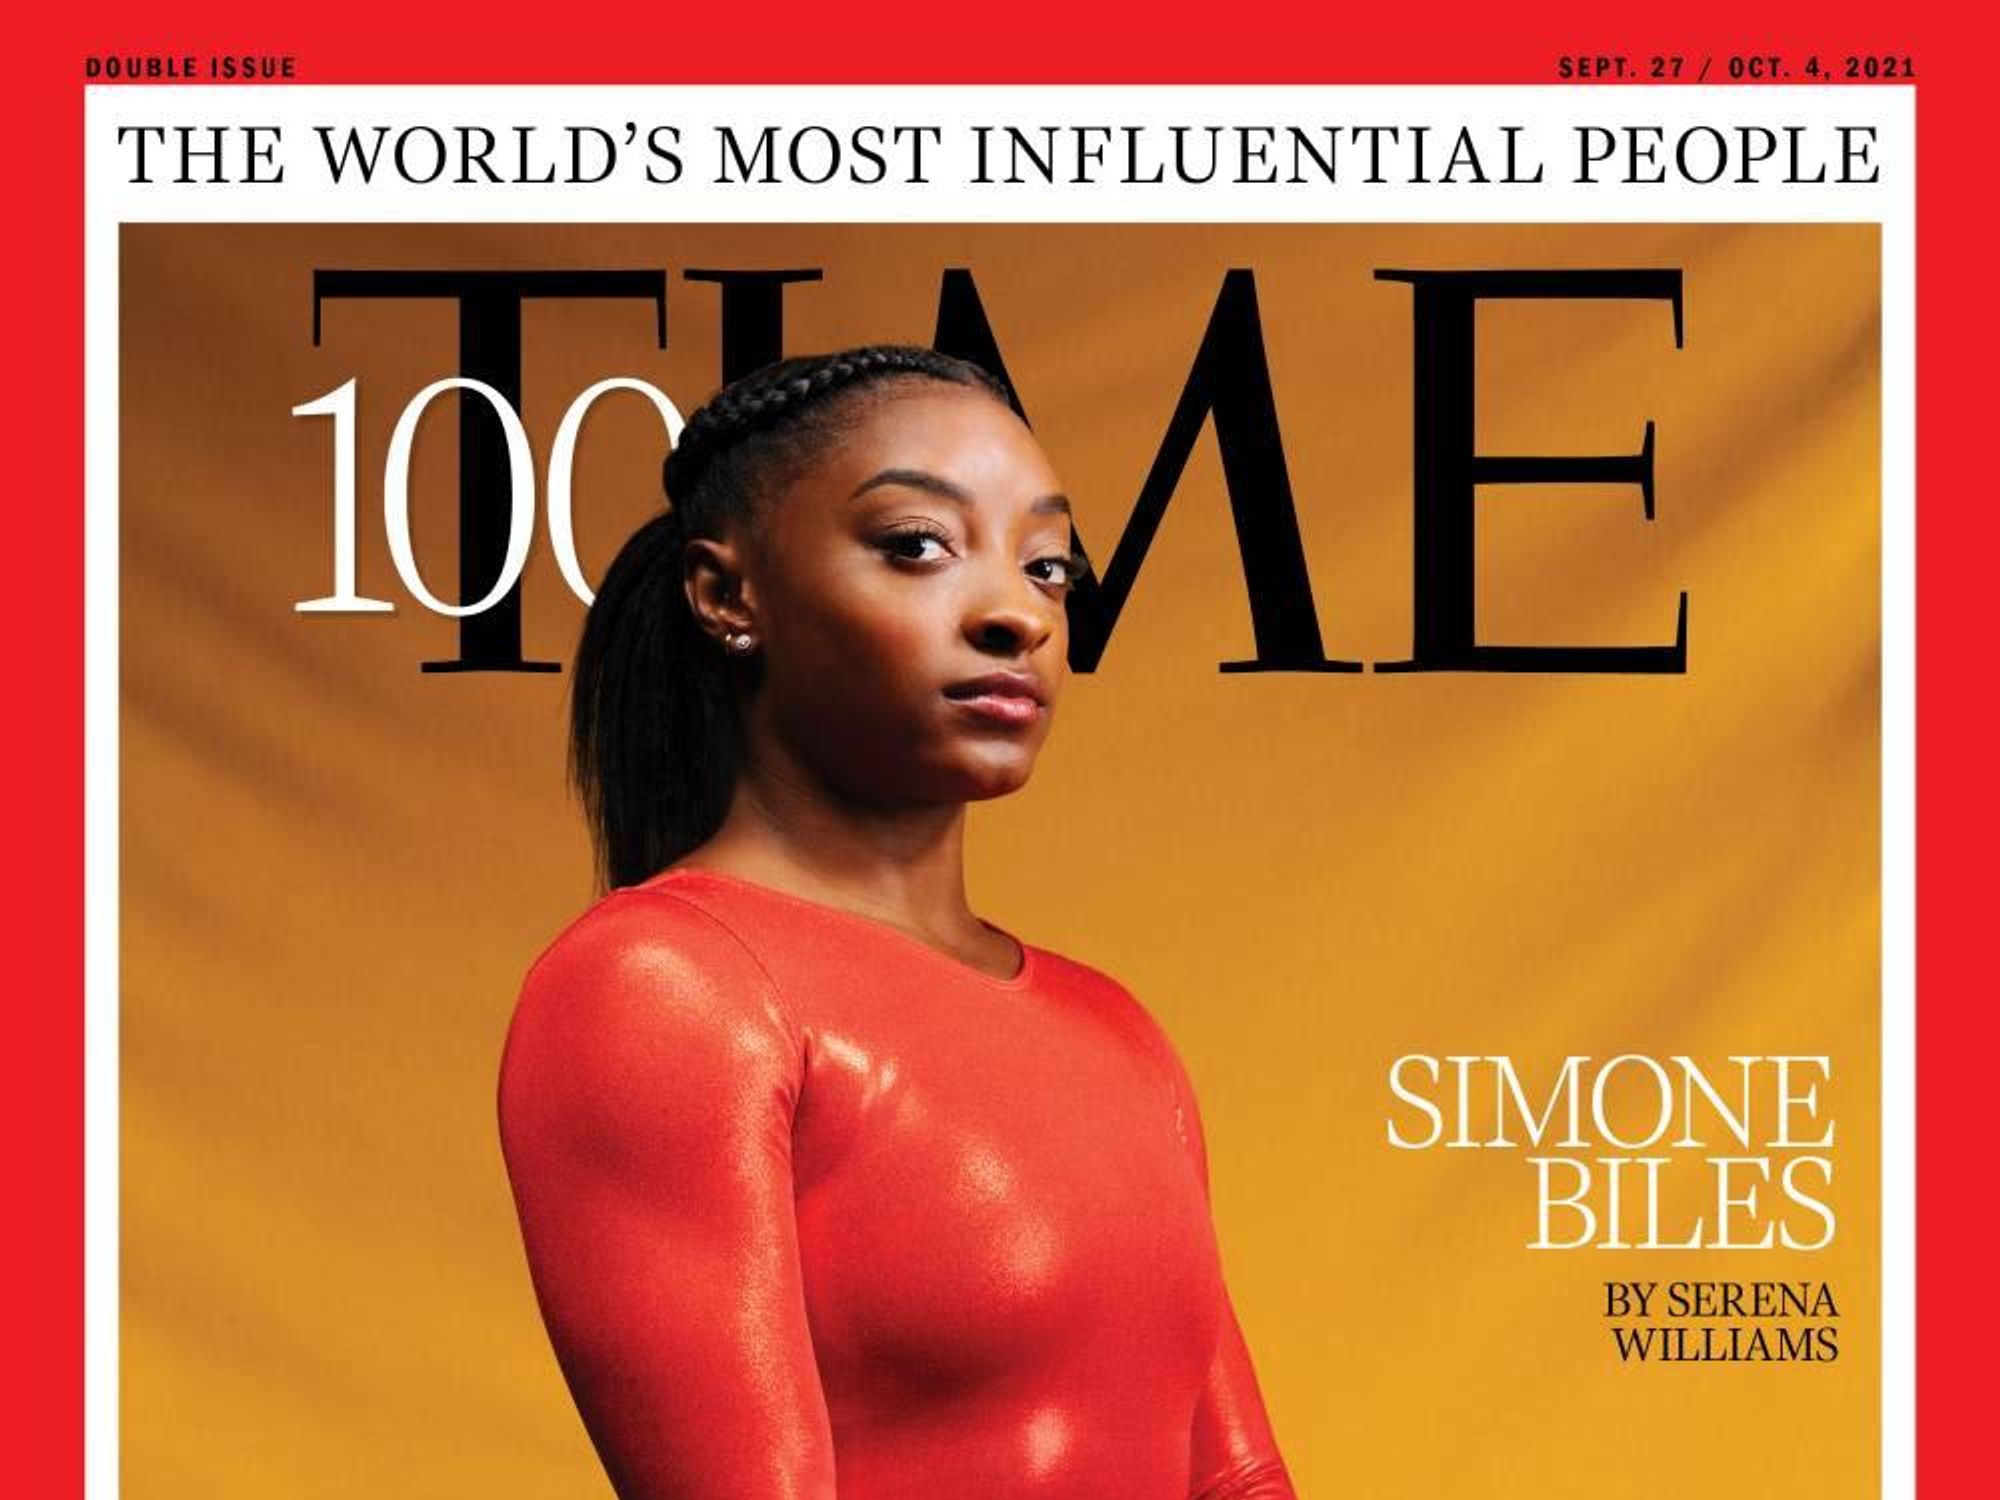 Simone Biles Time 100 Most Influential People 2021